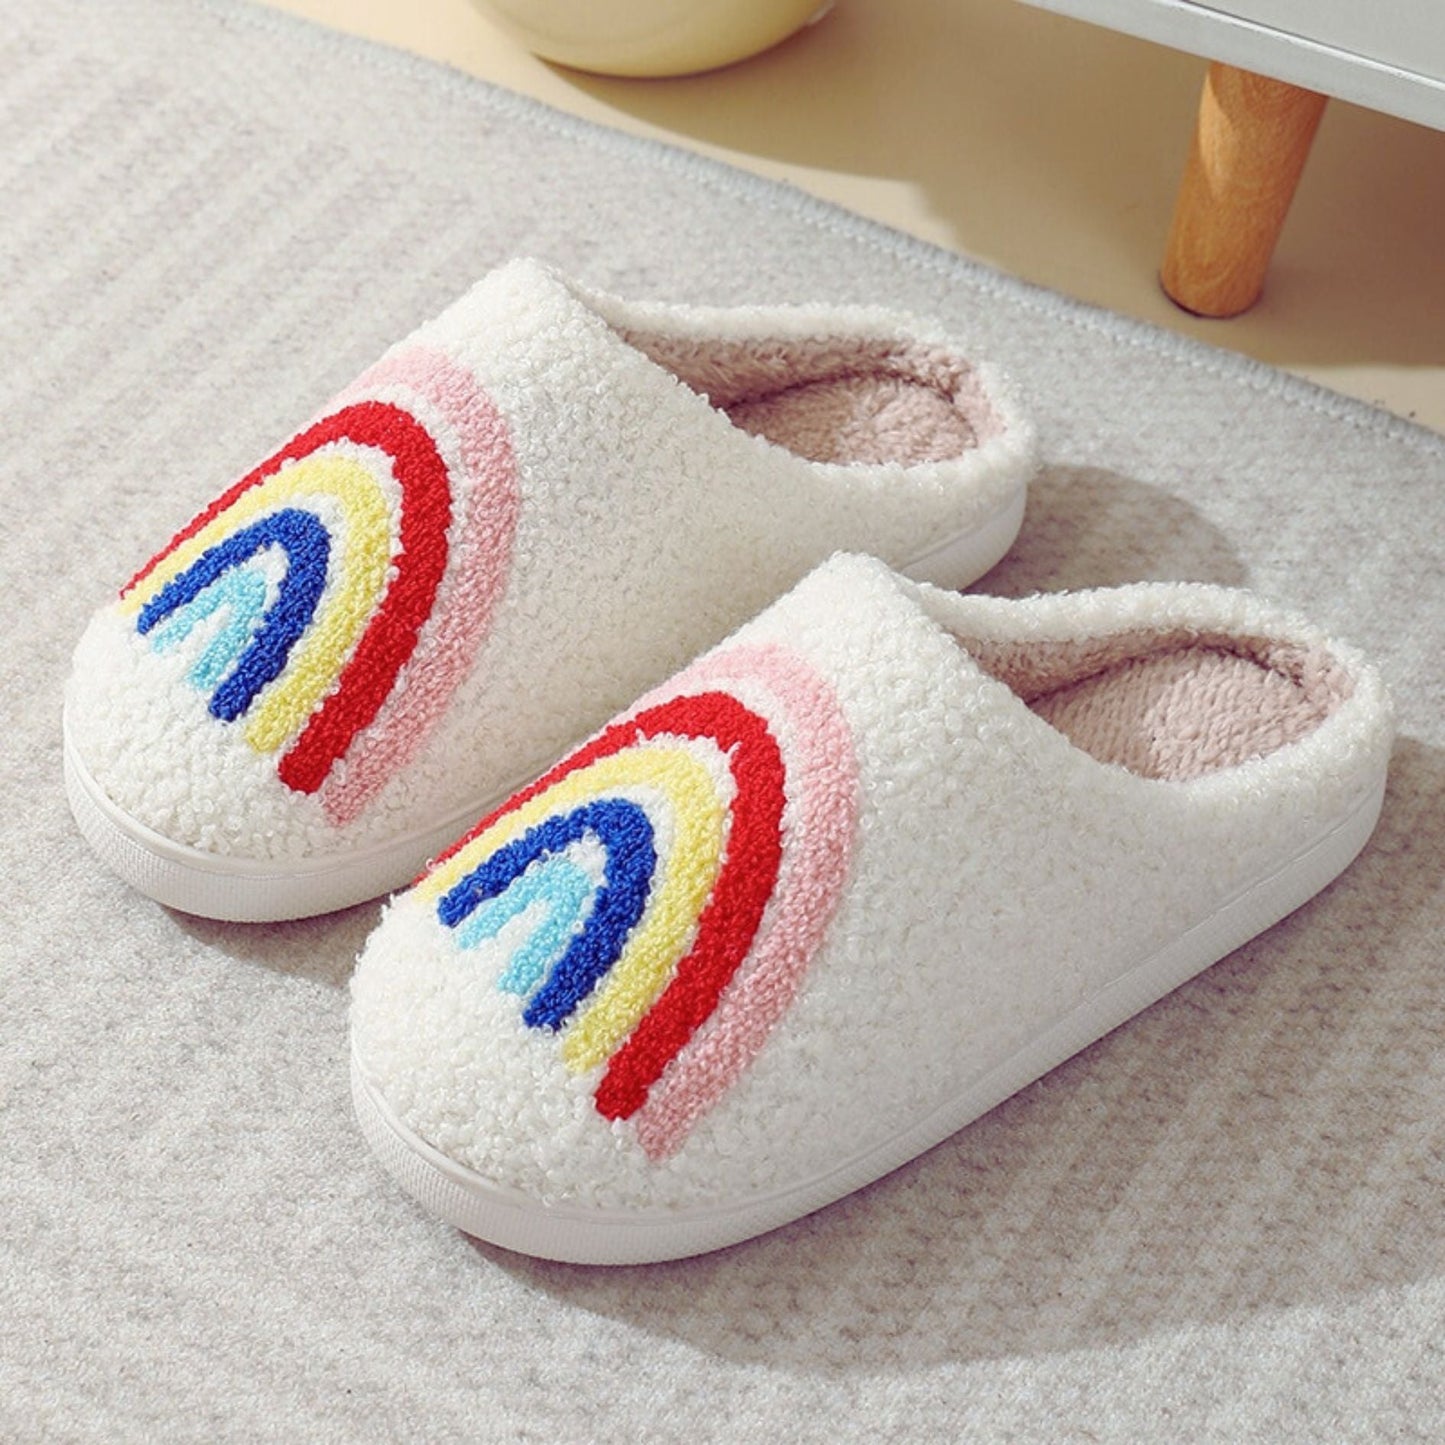 Rainbow Plush Cozy Women's Slippers | Giftable Slip-On Mules House Shoes